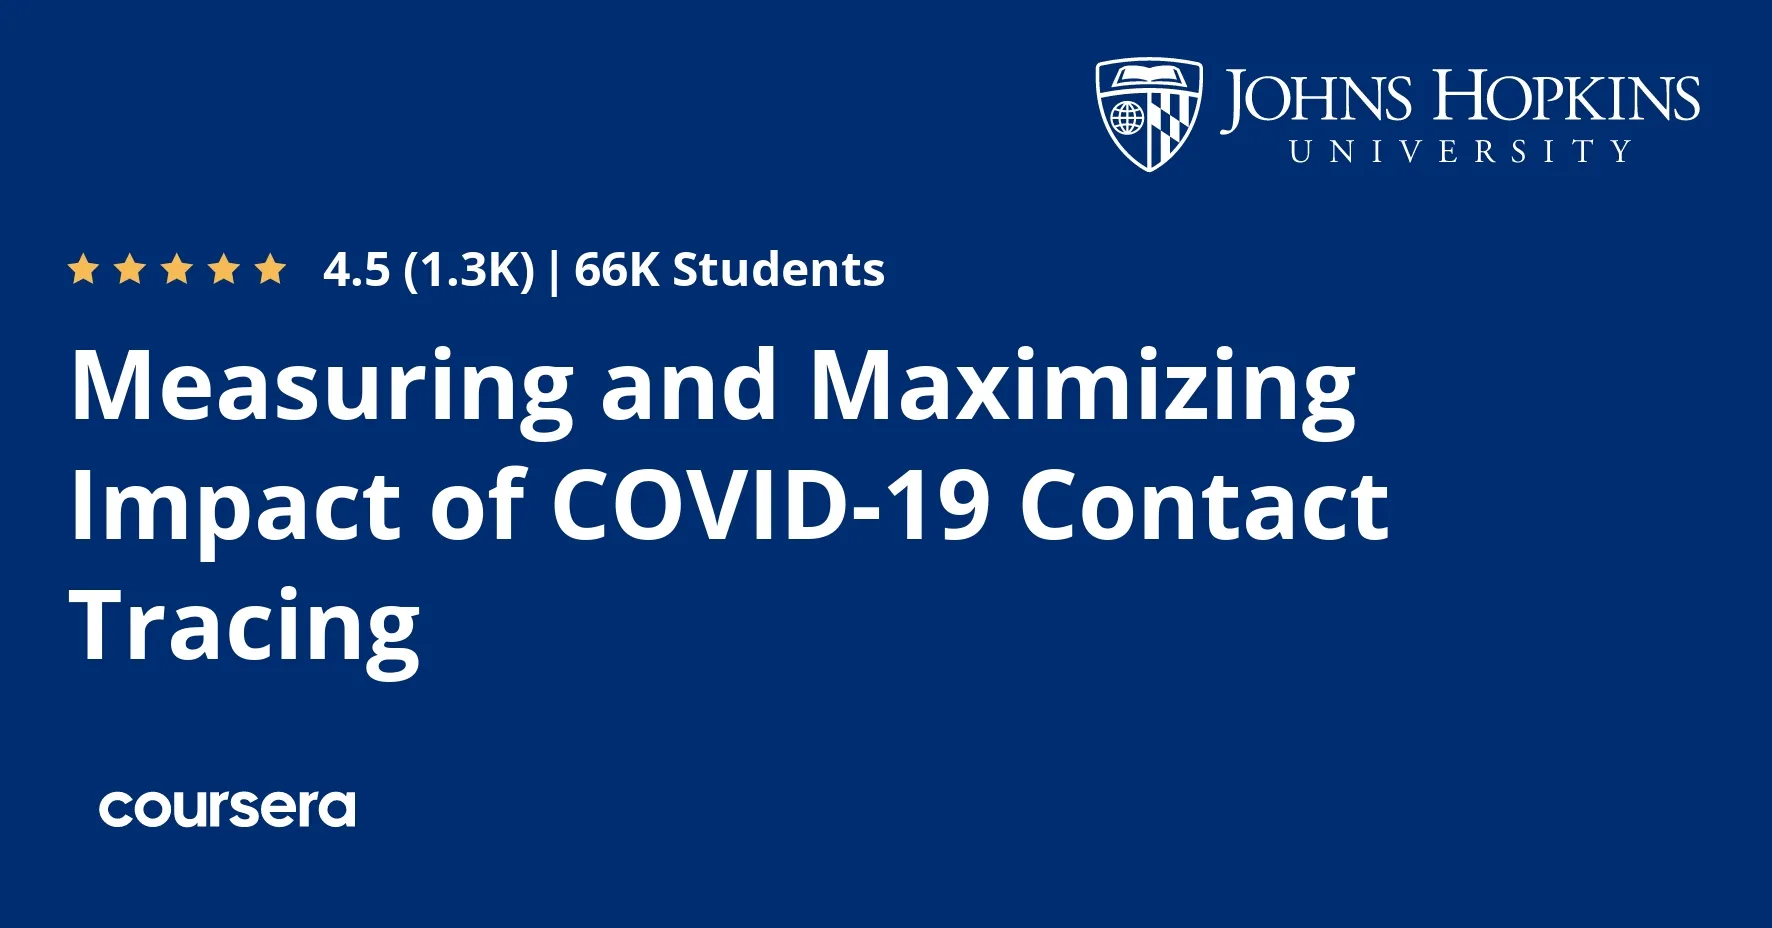 Measuring and Maximizing Impact of COVID-19 Contact Tracing